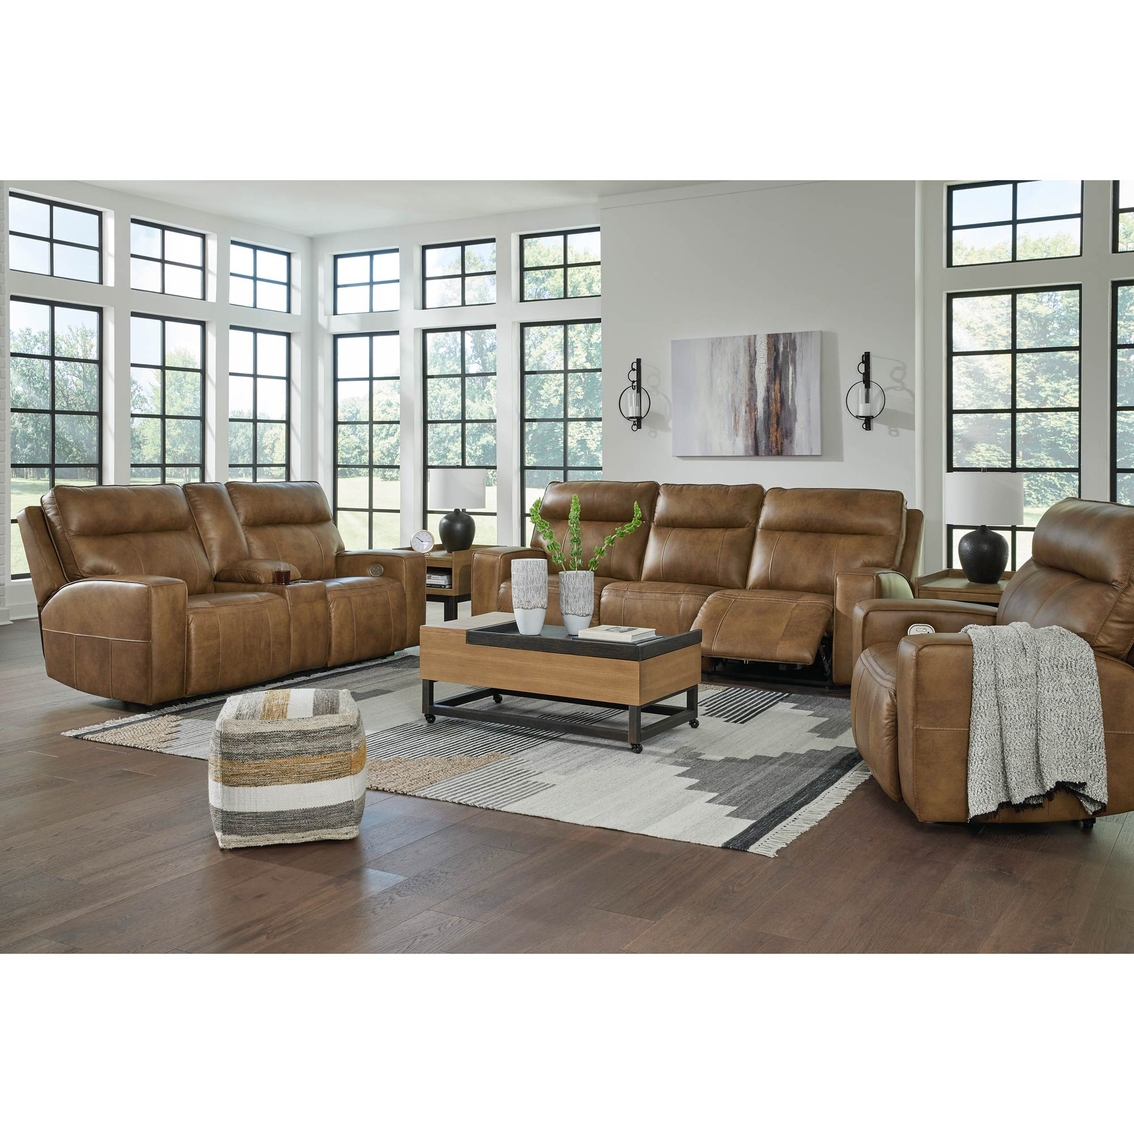 Signature Design by Ashley Game Plan Oversized Power Recliner - Image 9 of 9